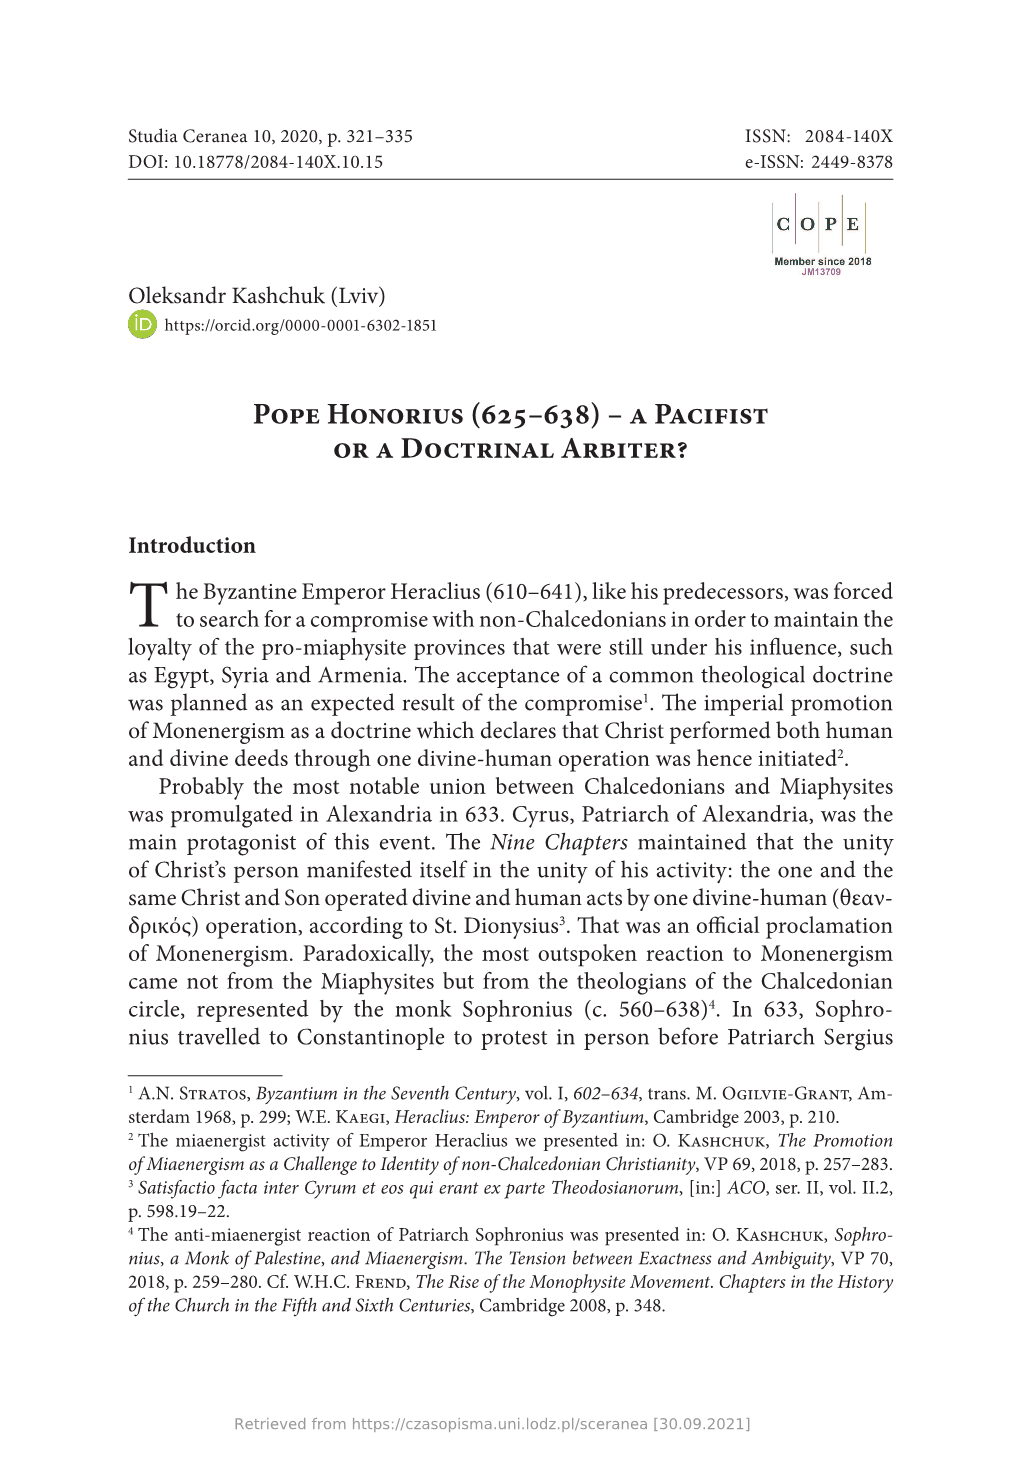 Pope Honorius (625–638) – a Pacifist Or a Doctrinal Arbiter?